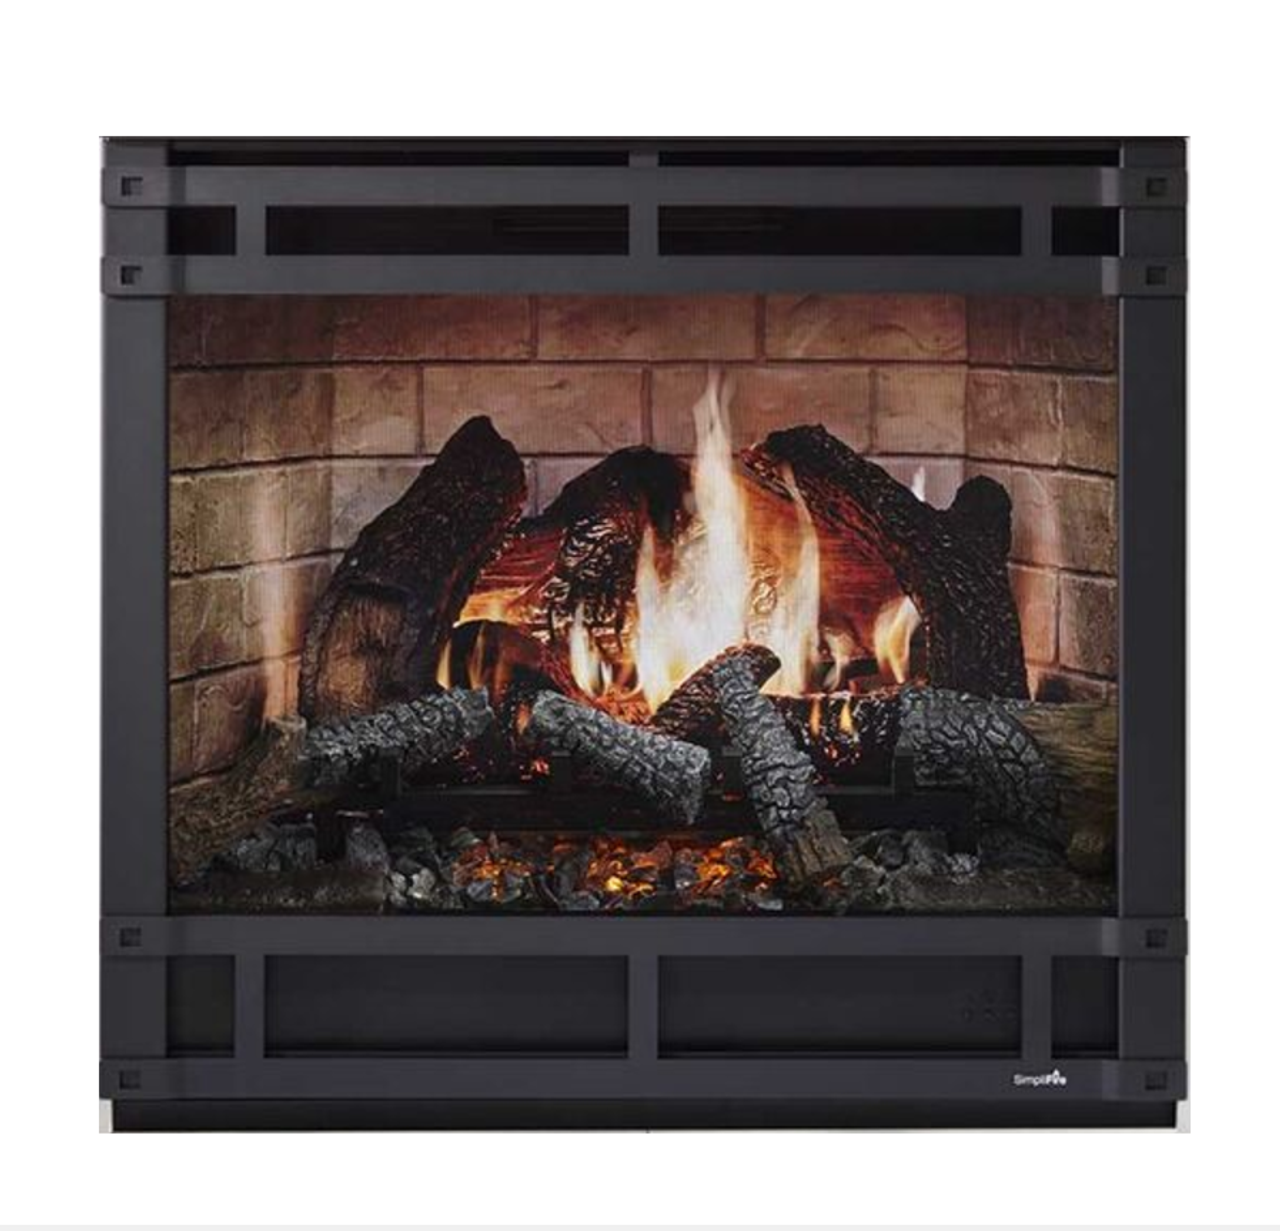 Inception 36" Electric Fireplace with Halston Front